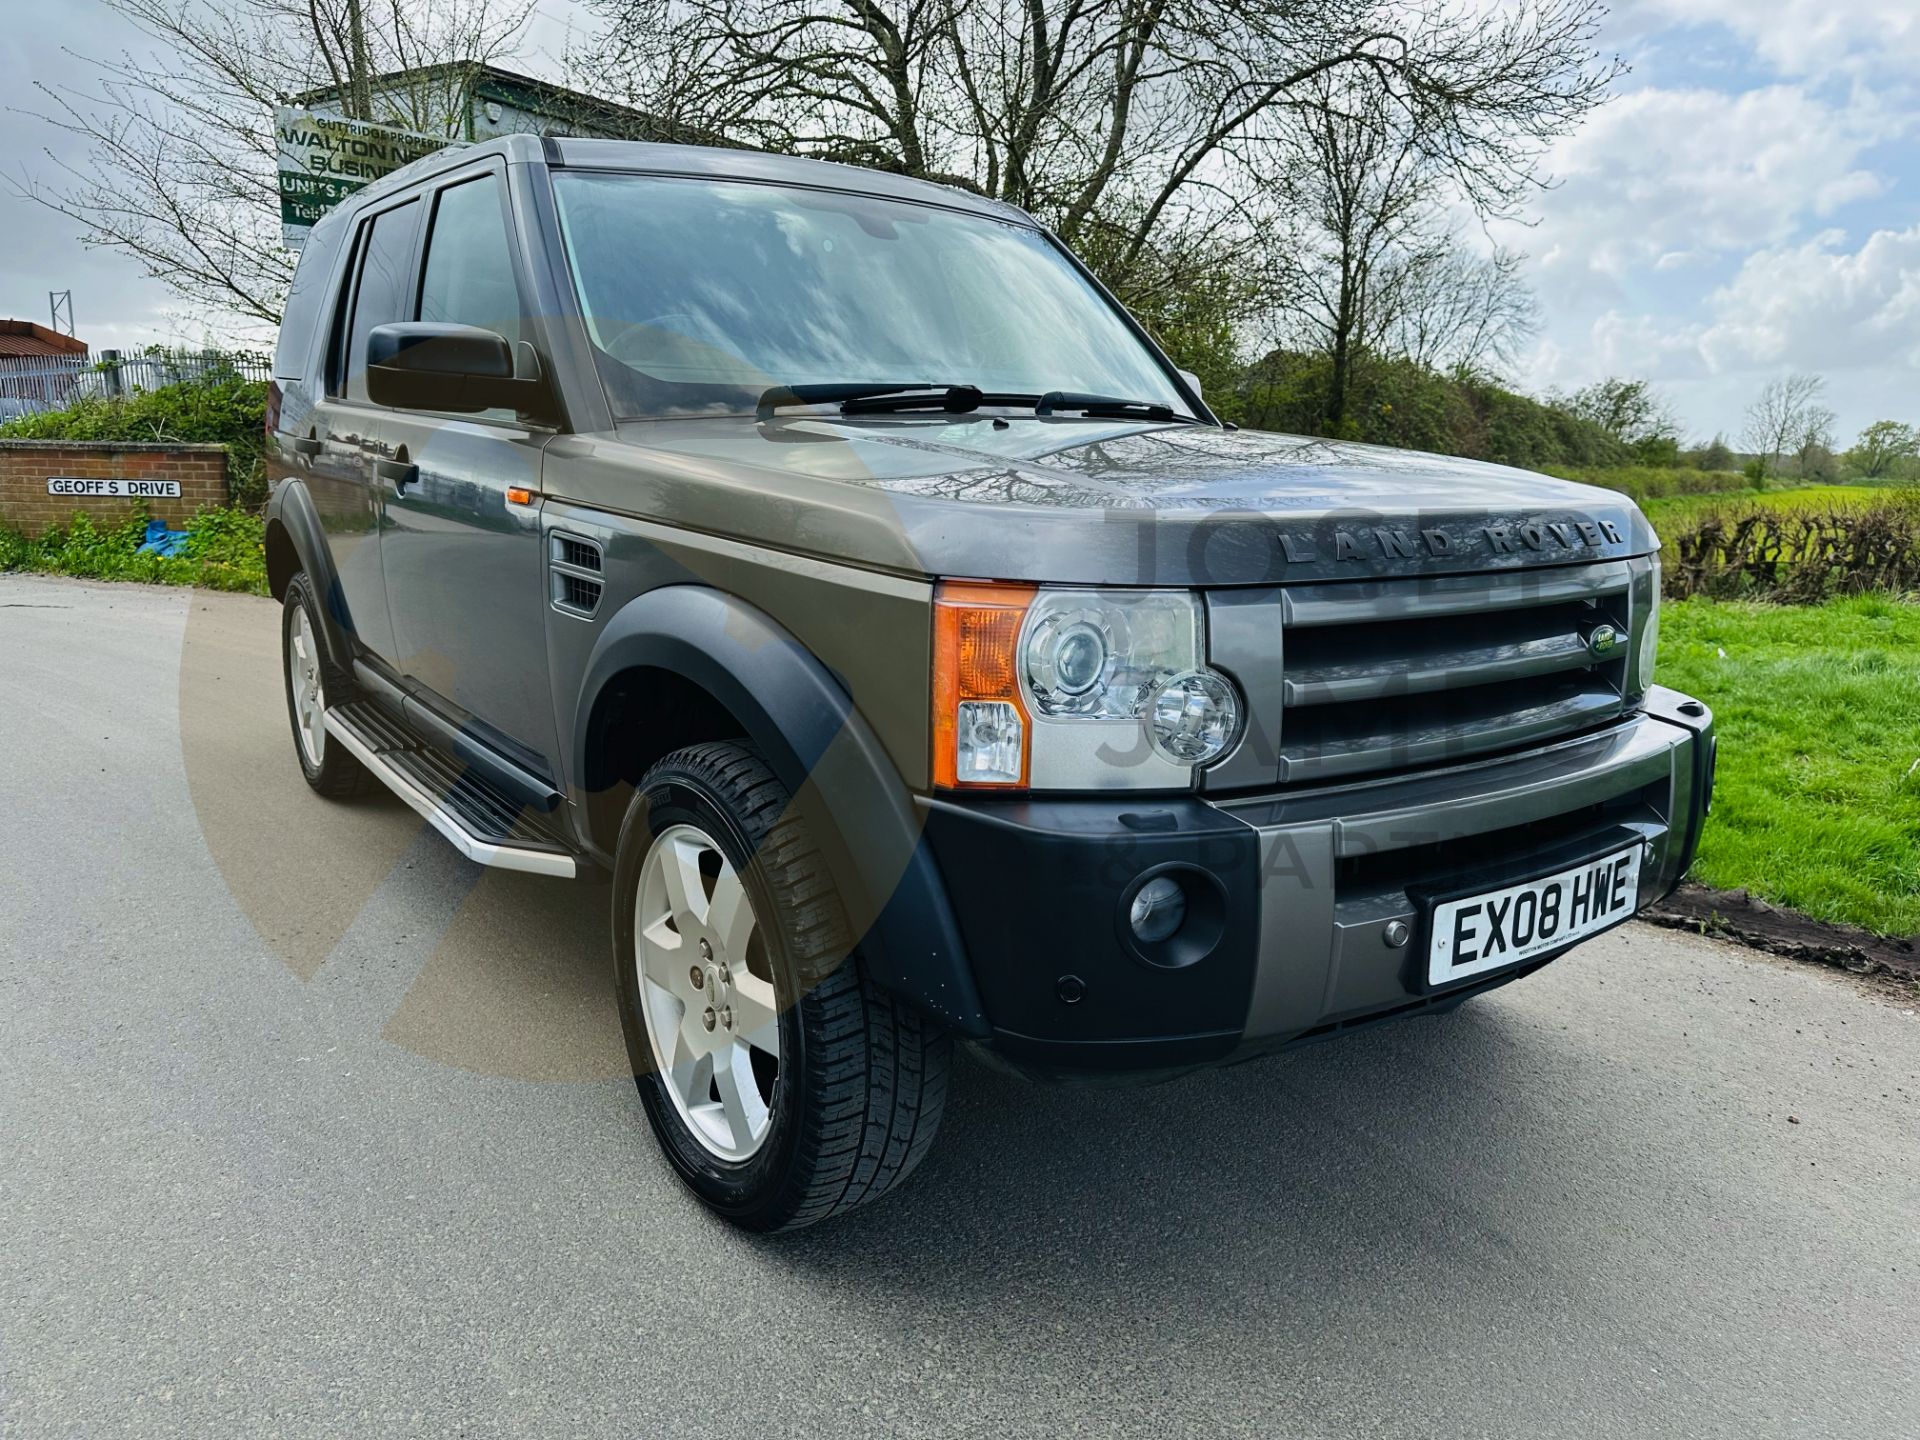 (ON SALE) LAND ROVER DISCOVERY TDV6 *HSE EDITION* AUTO (08 REG) 7 SEATER - 12X SERVICES (NO VAT) - Image 2 of 51